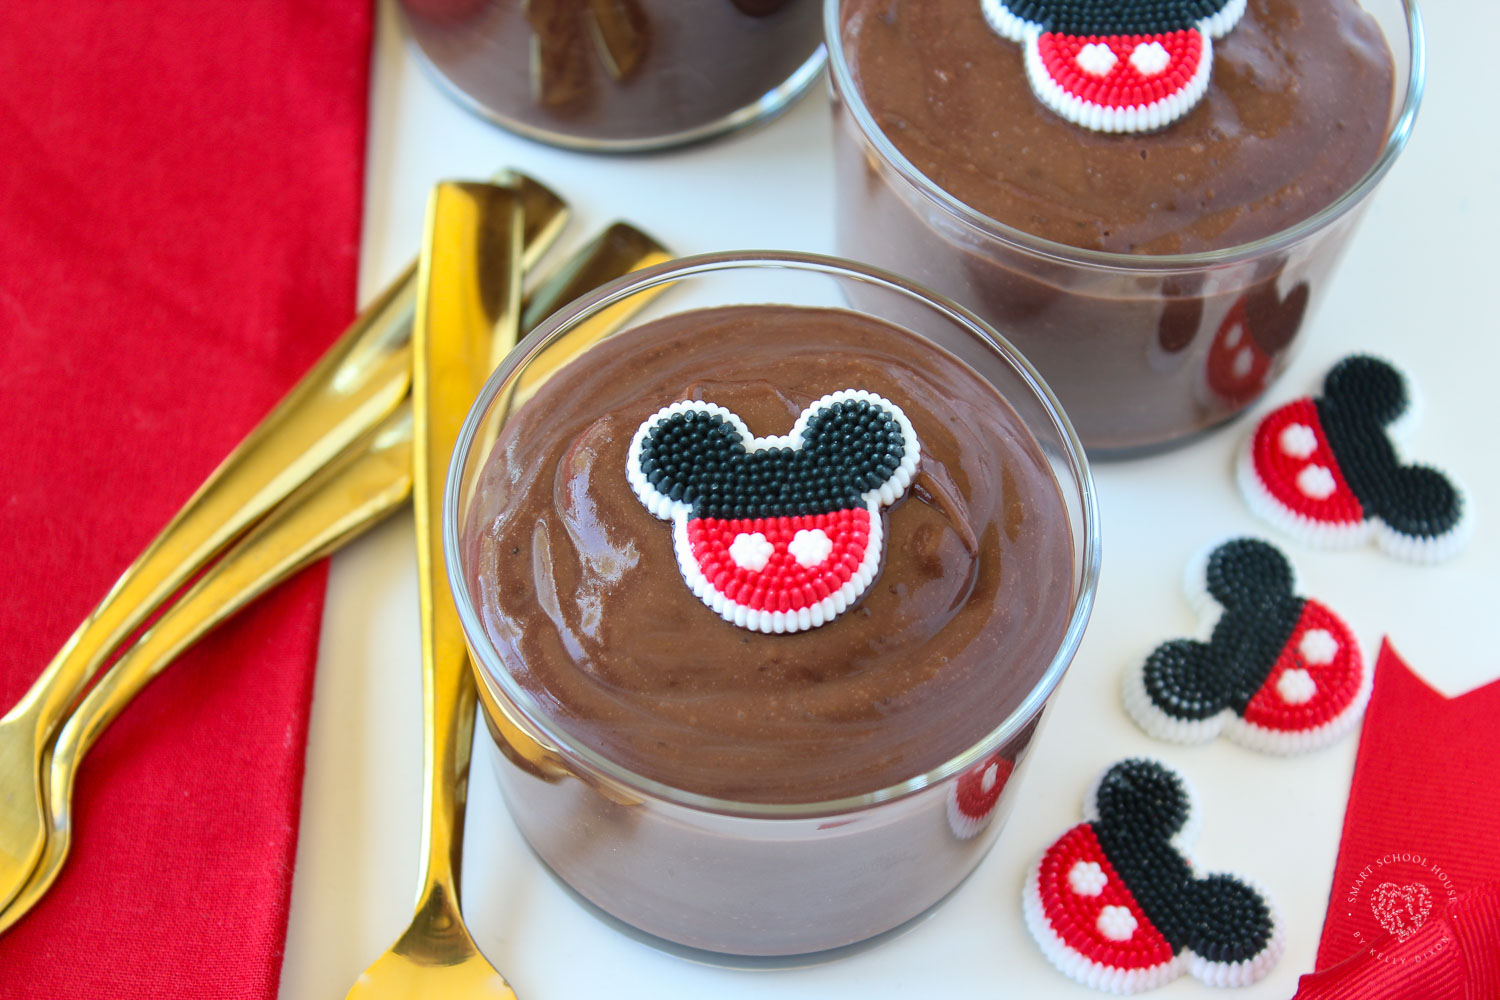 Disney Pudding Cups. An easy snack idea for a Mickey Mouse themed party!